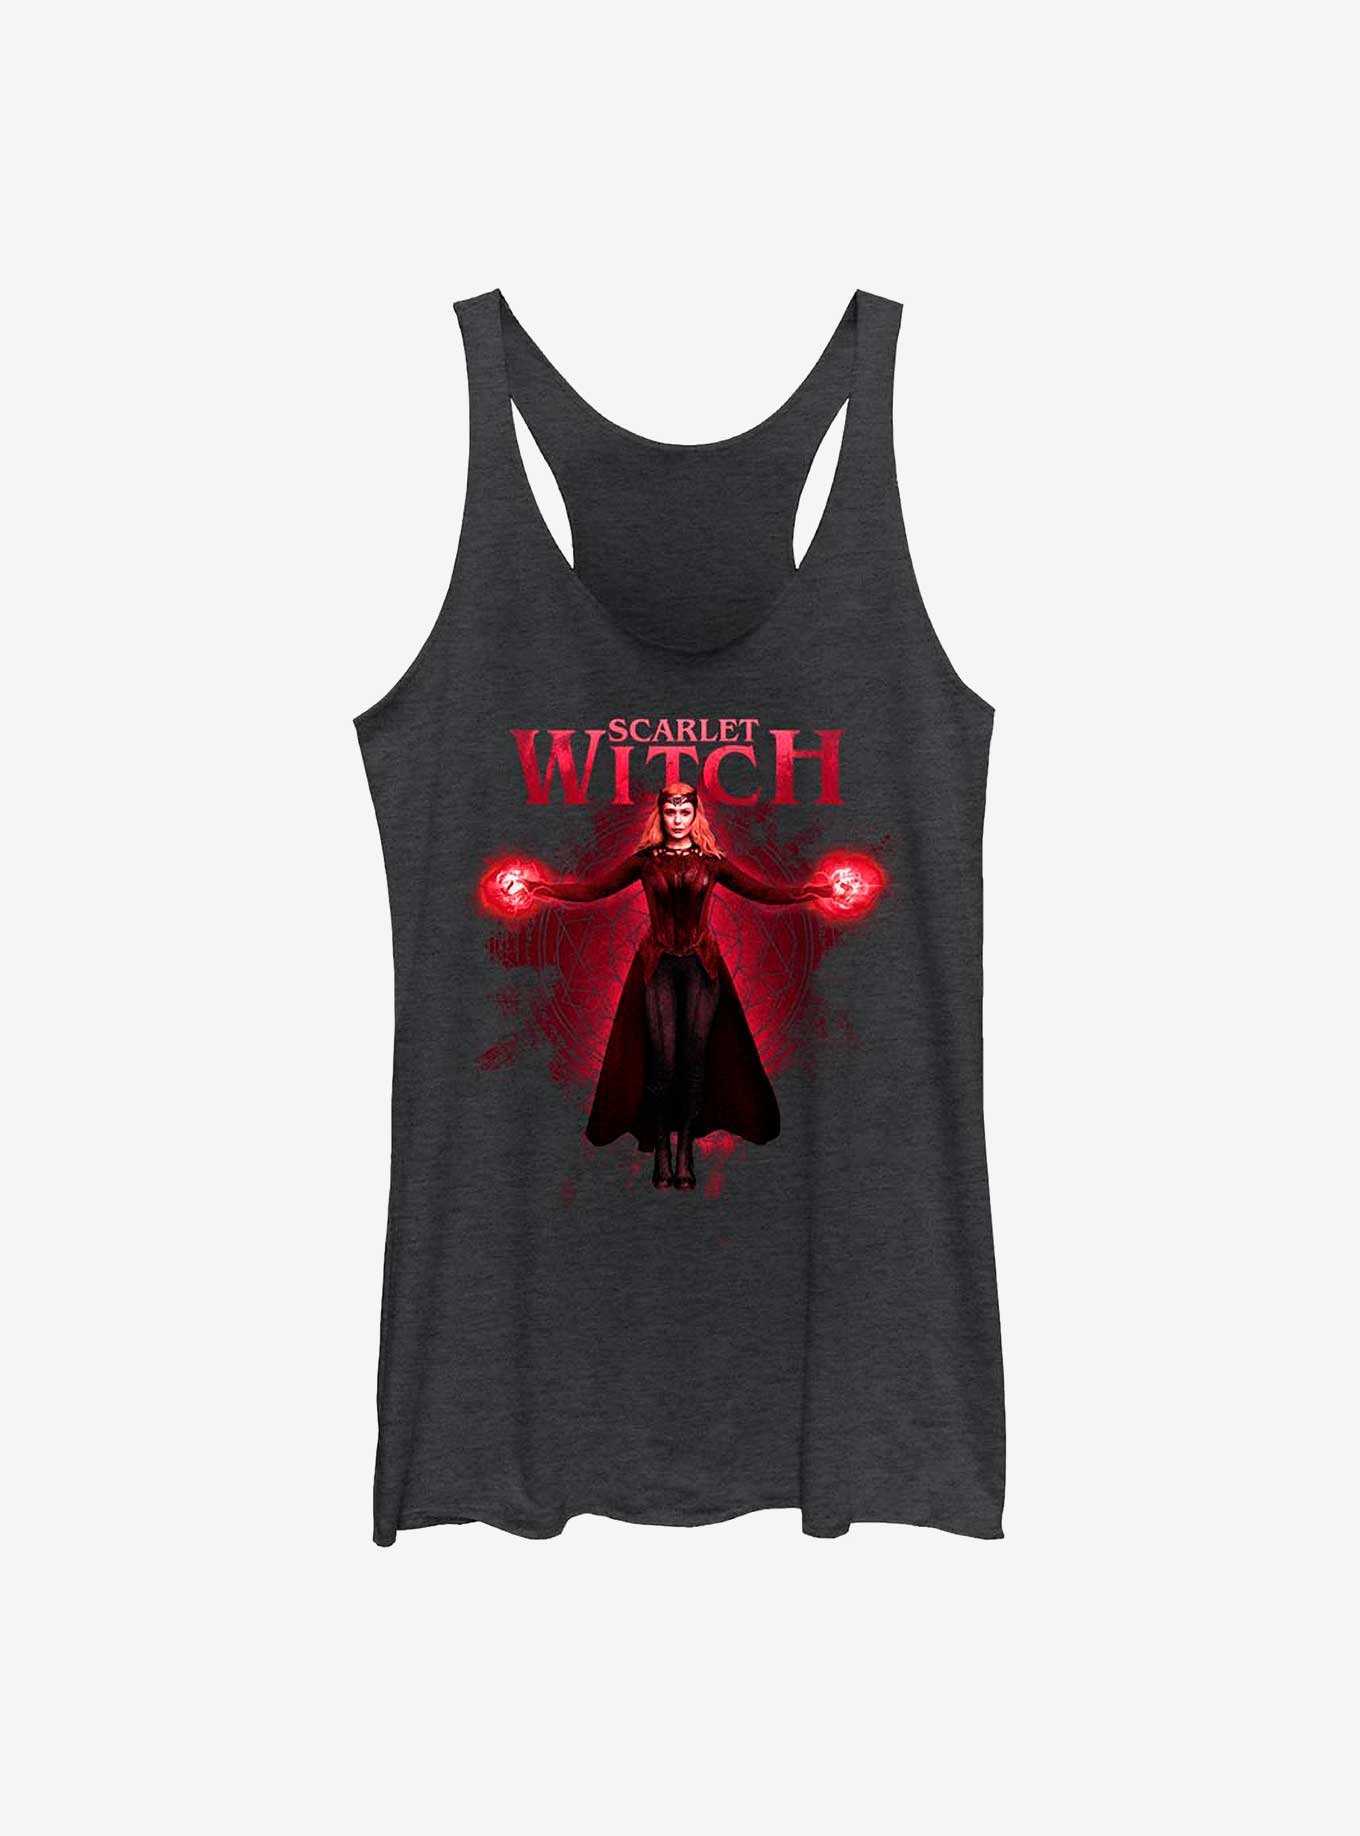 Marvel Doctor Strange in the Multiverse of Madness Scarlet Witch Girls Tank, , hi-res